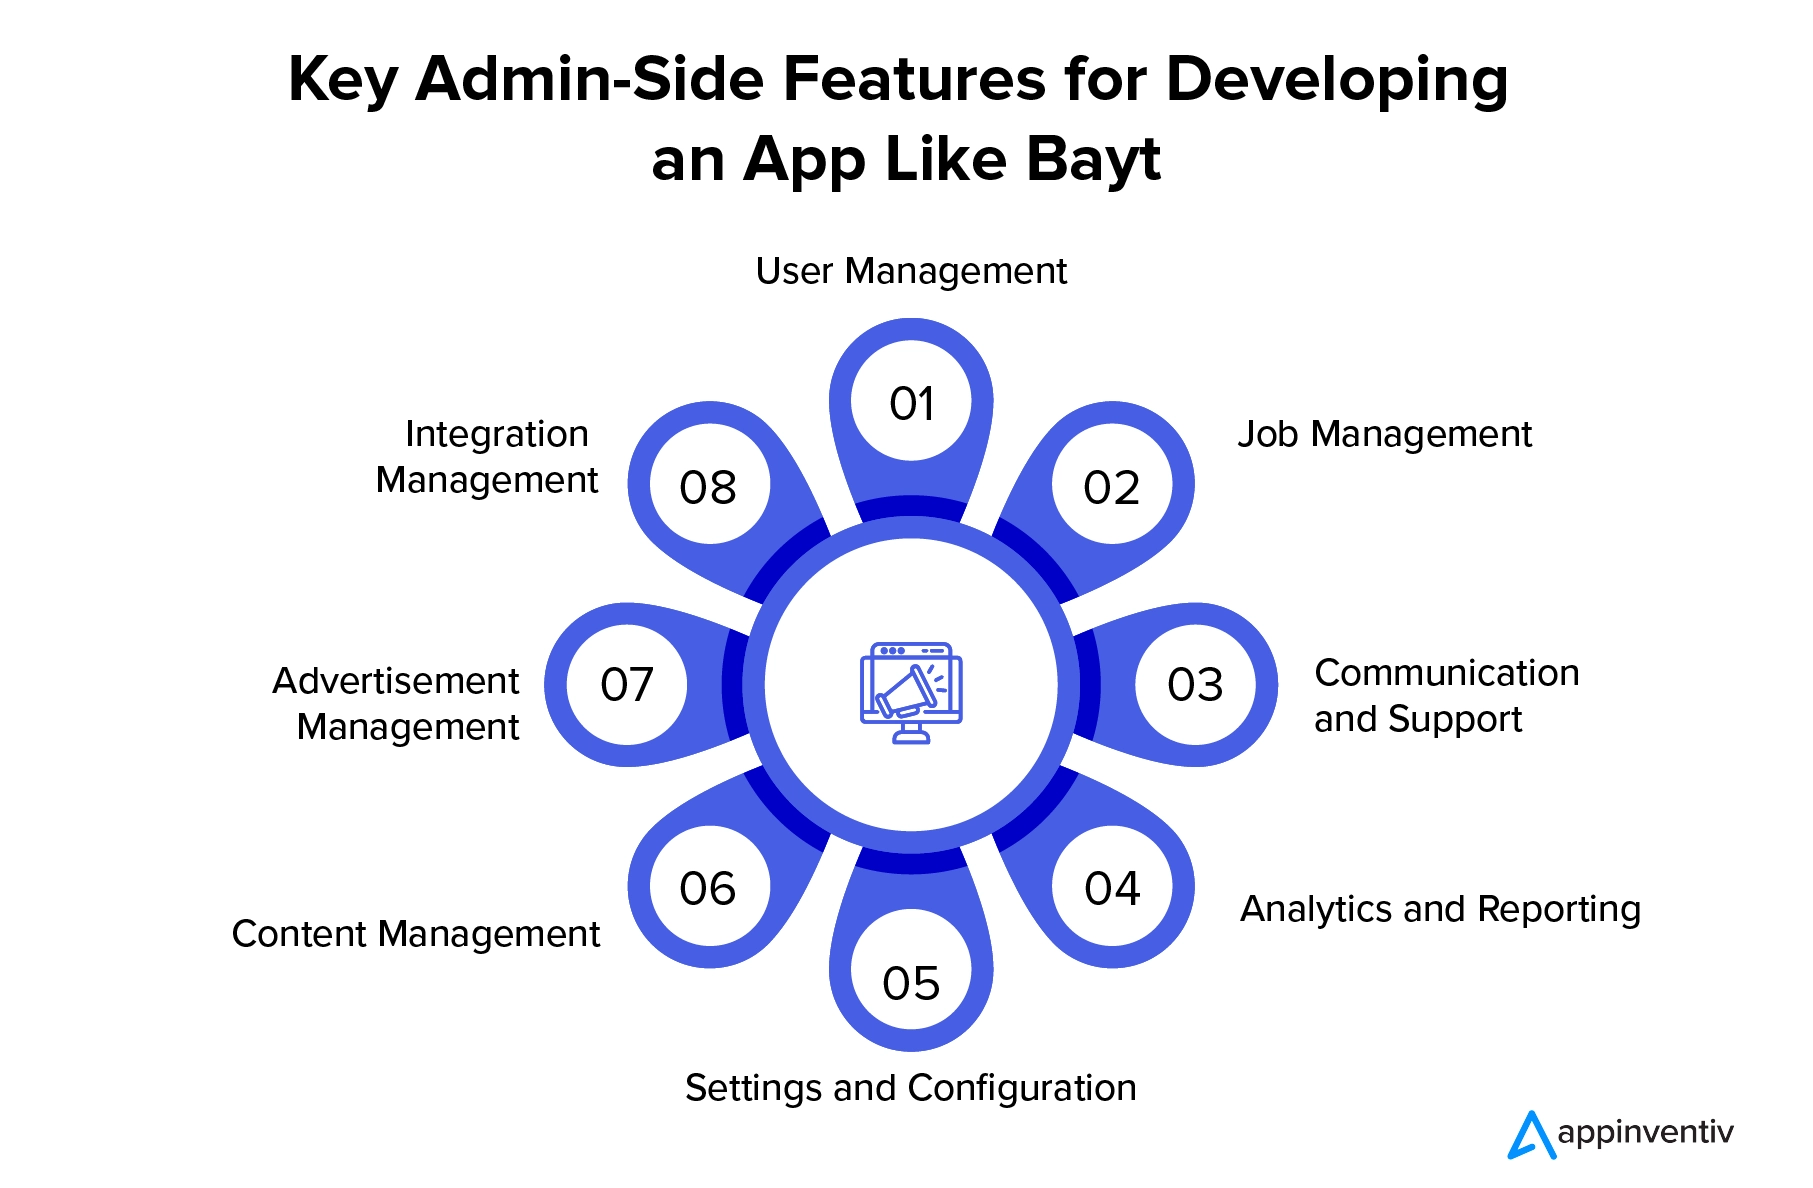 Essential Admin Features for Creating an App Similar to Bayt